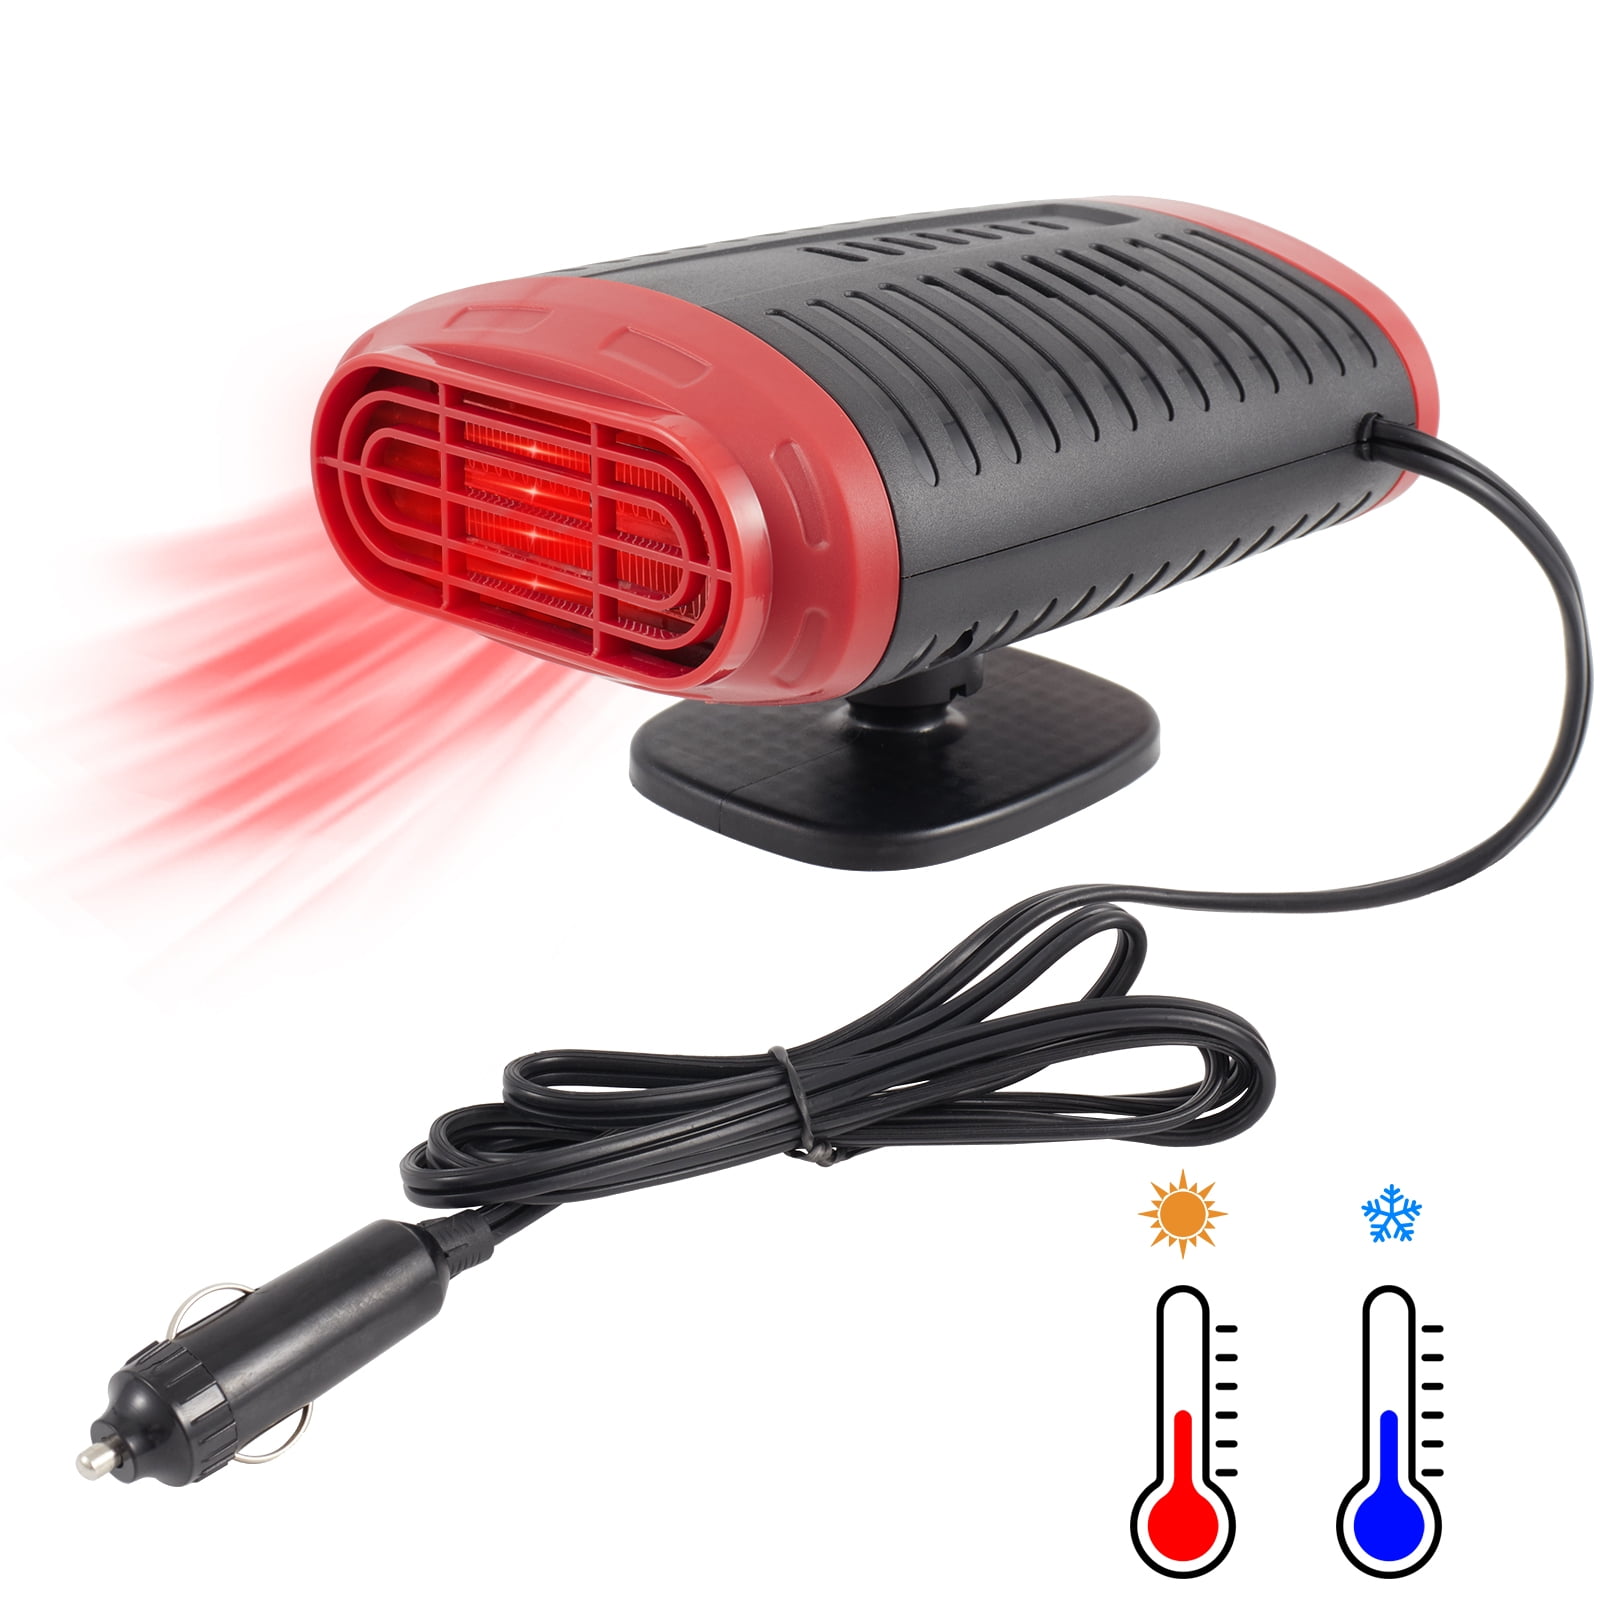 Car Heater 12V 800W Portable Car Fan Heaters with Thickened Copper Wire Car Heated Fan Windshield De-Icers Defroster Demister 